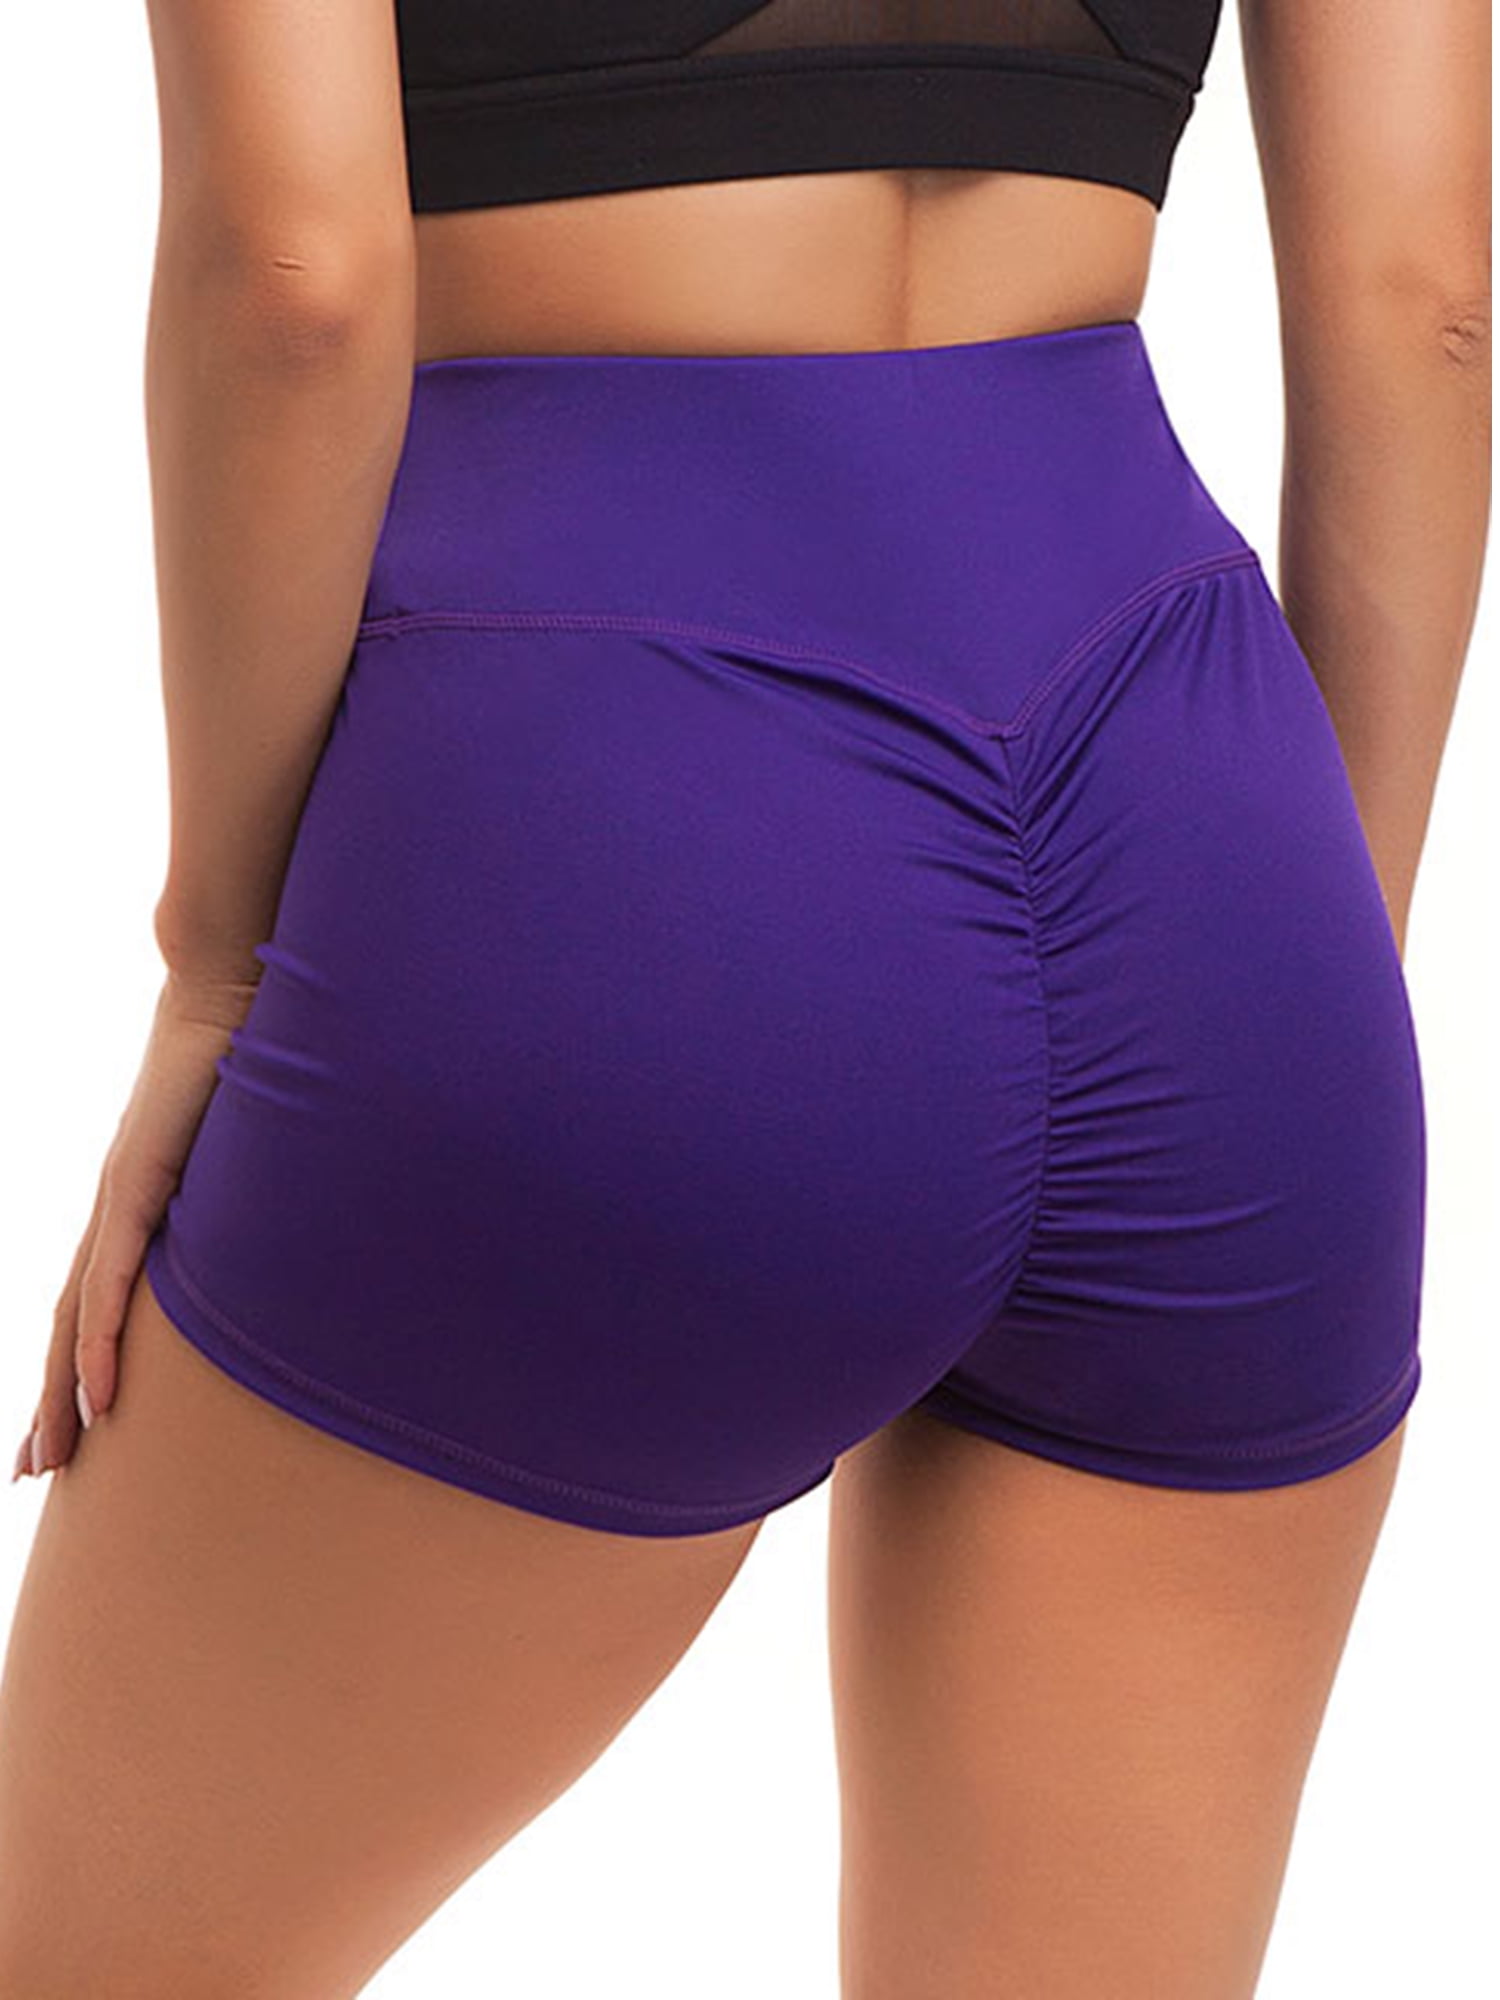 Womens High Waist Yoga Shorts Push Up Ruched Hot Pants Sports Booty Gym Workout 